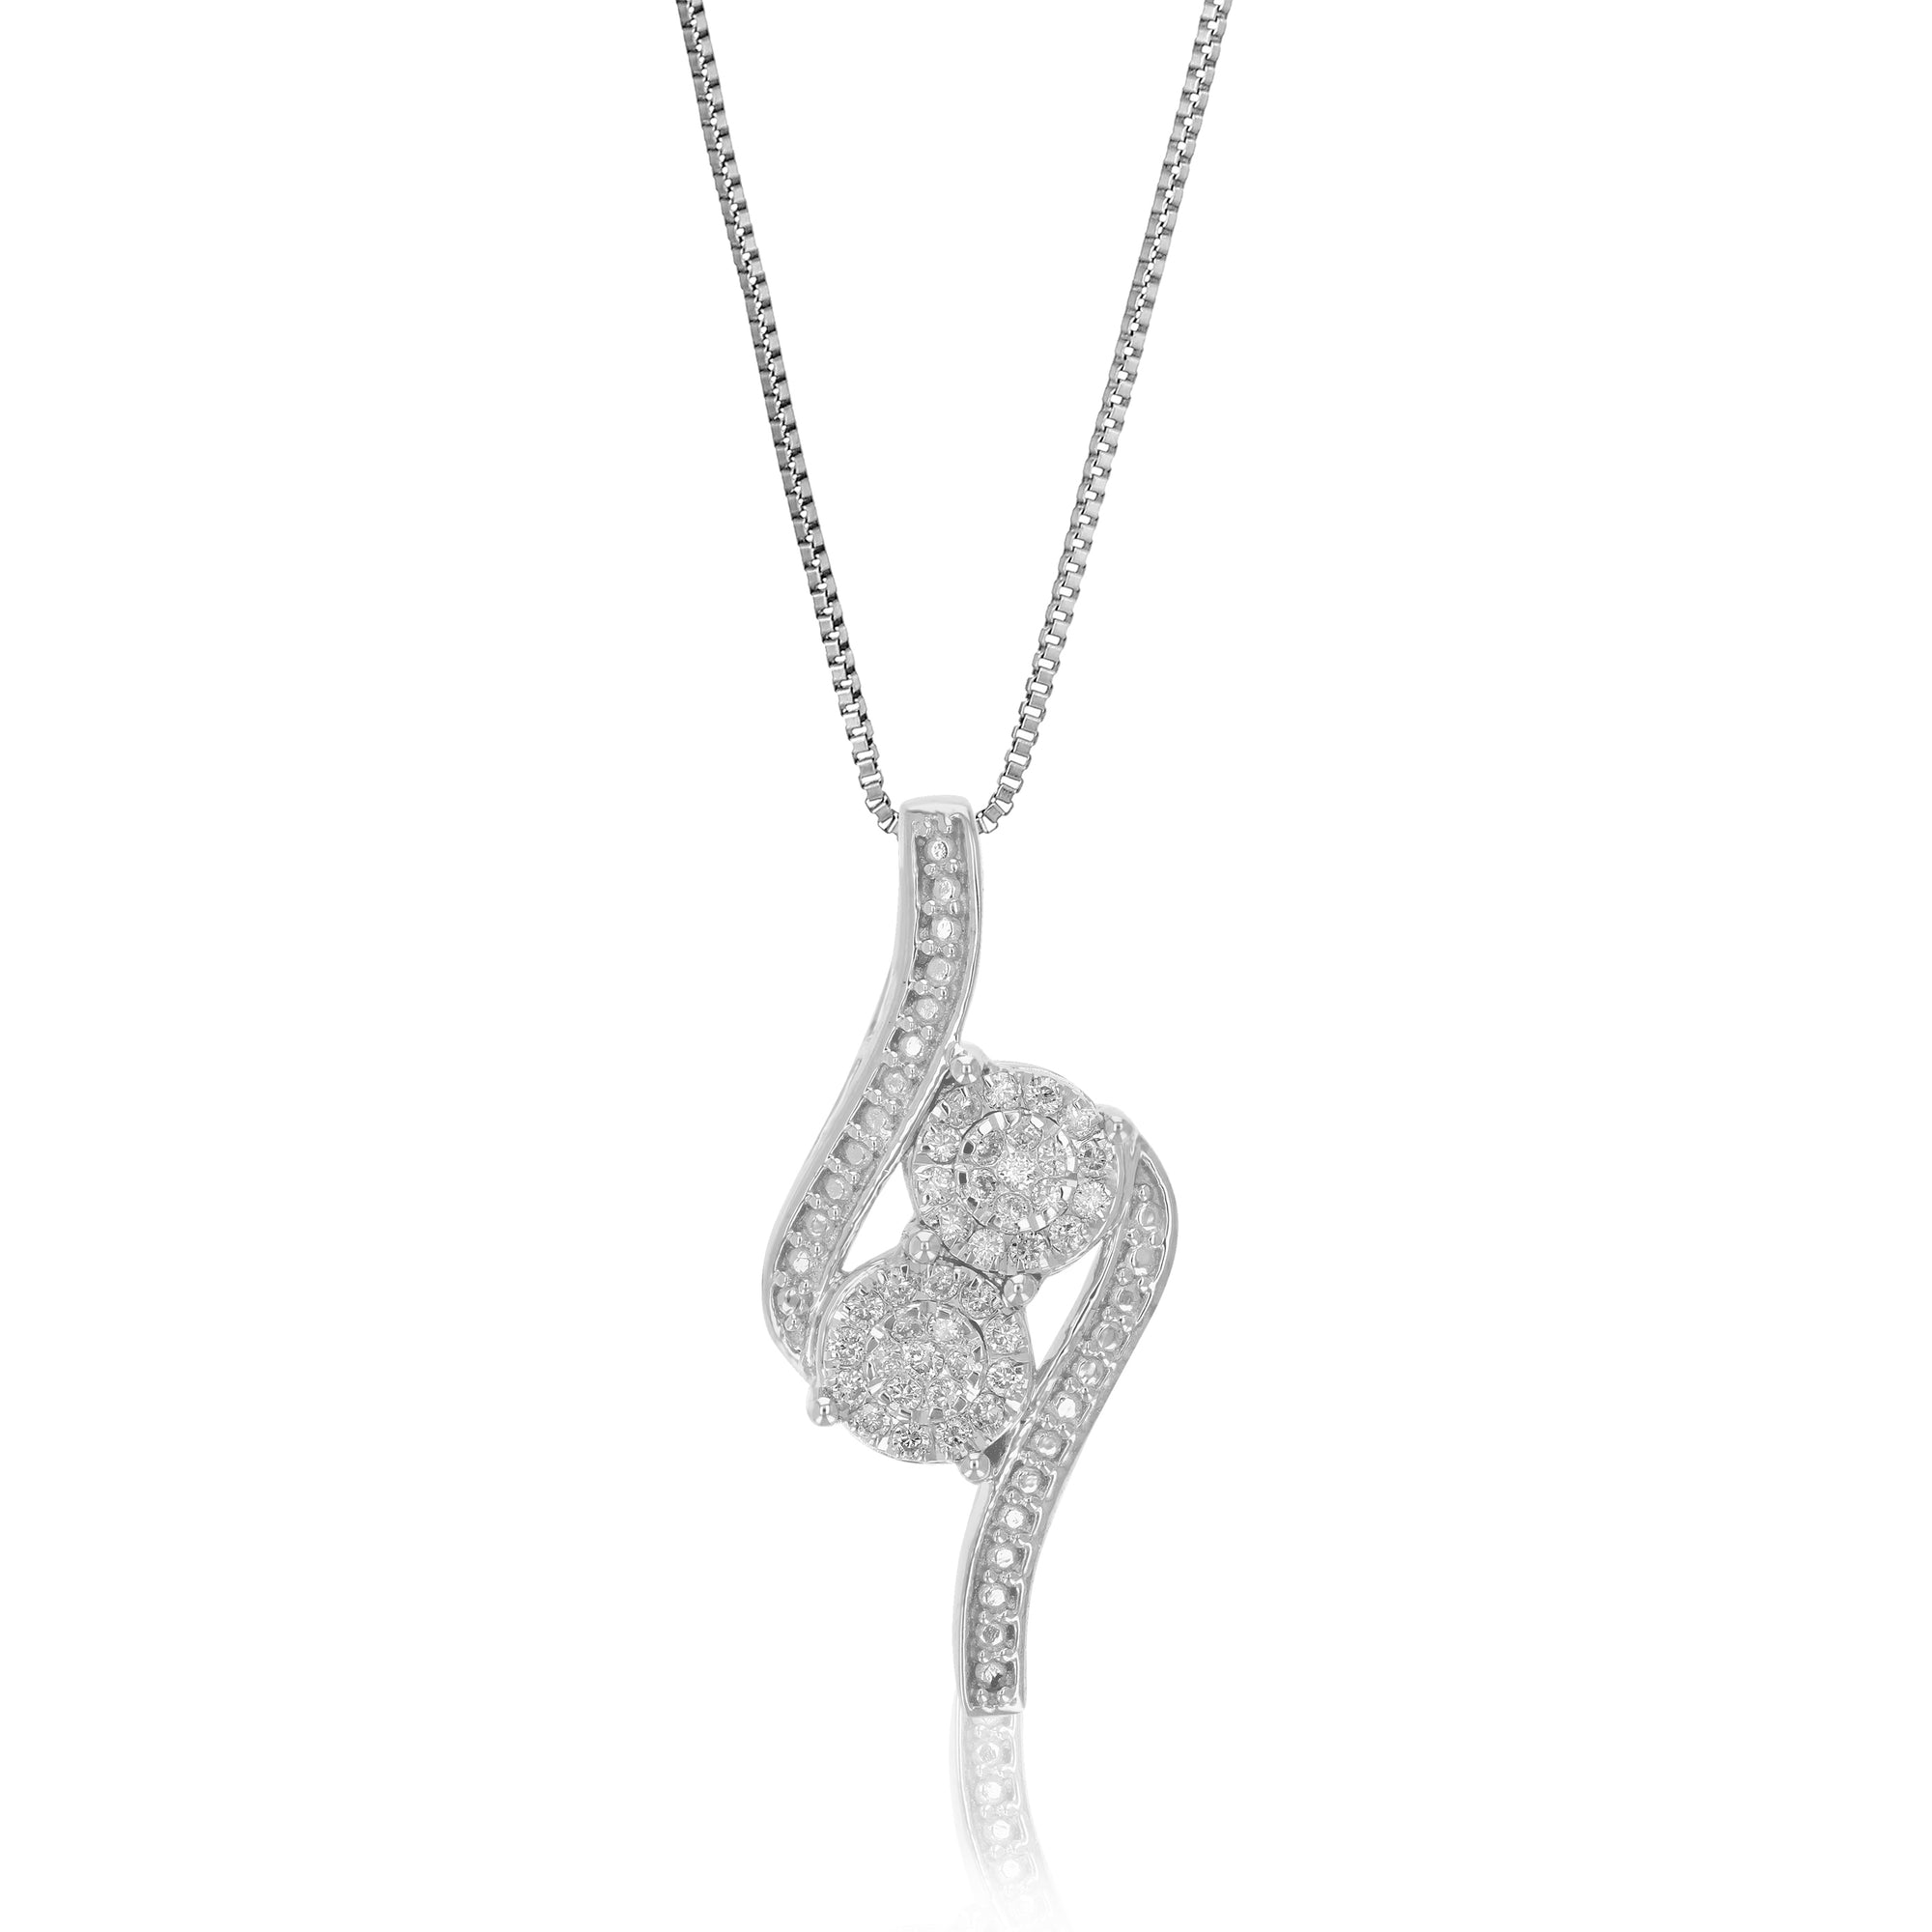 1/6 cttw Diamond Pendant Necklace for Women, Lab Grown Diamond Bypass Pendant Necklace in .925 Sterling Silver with Chain, Size 1 Inch